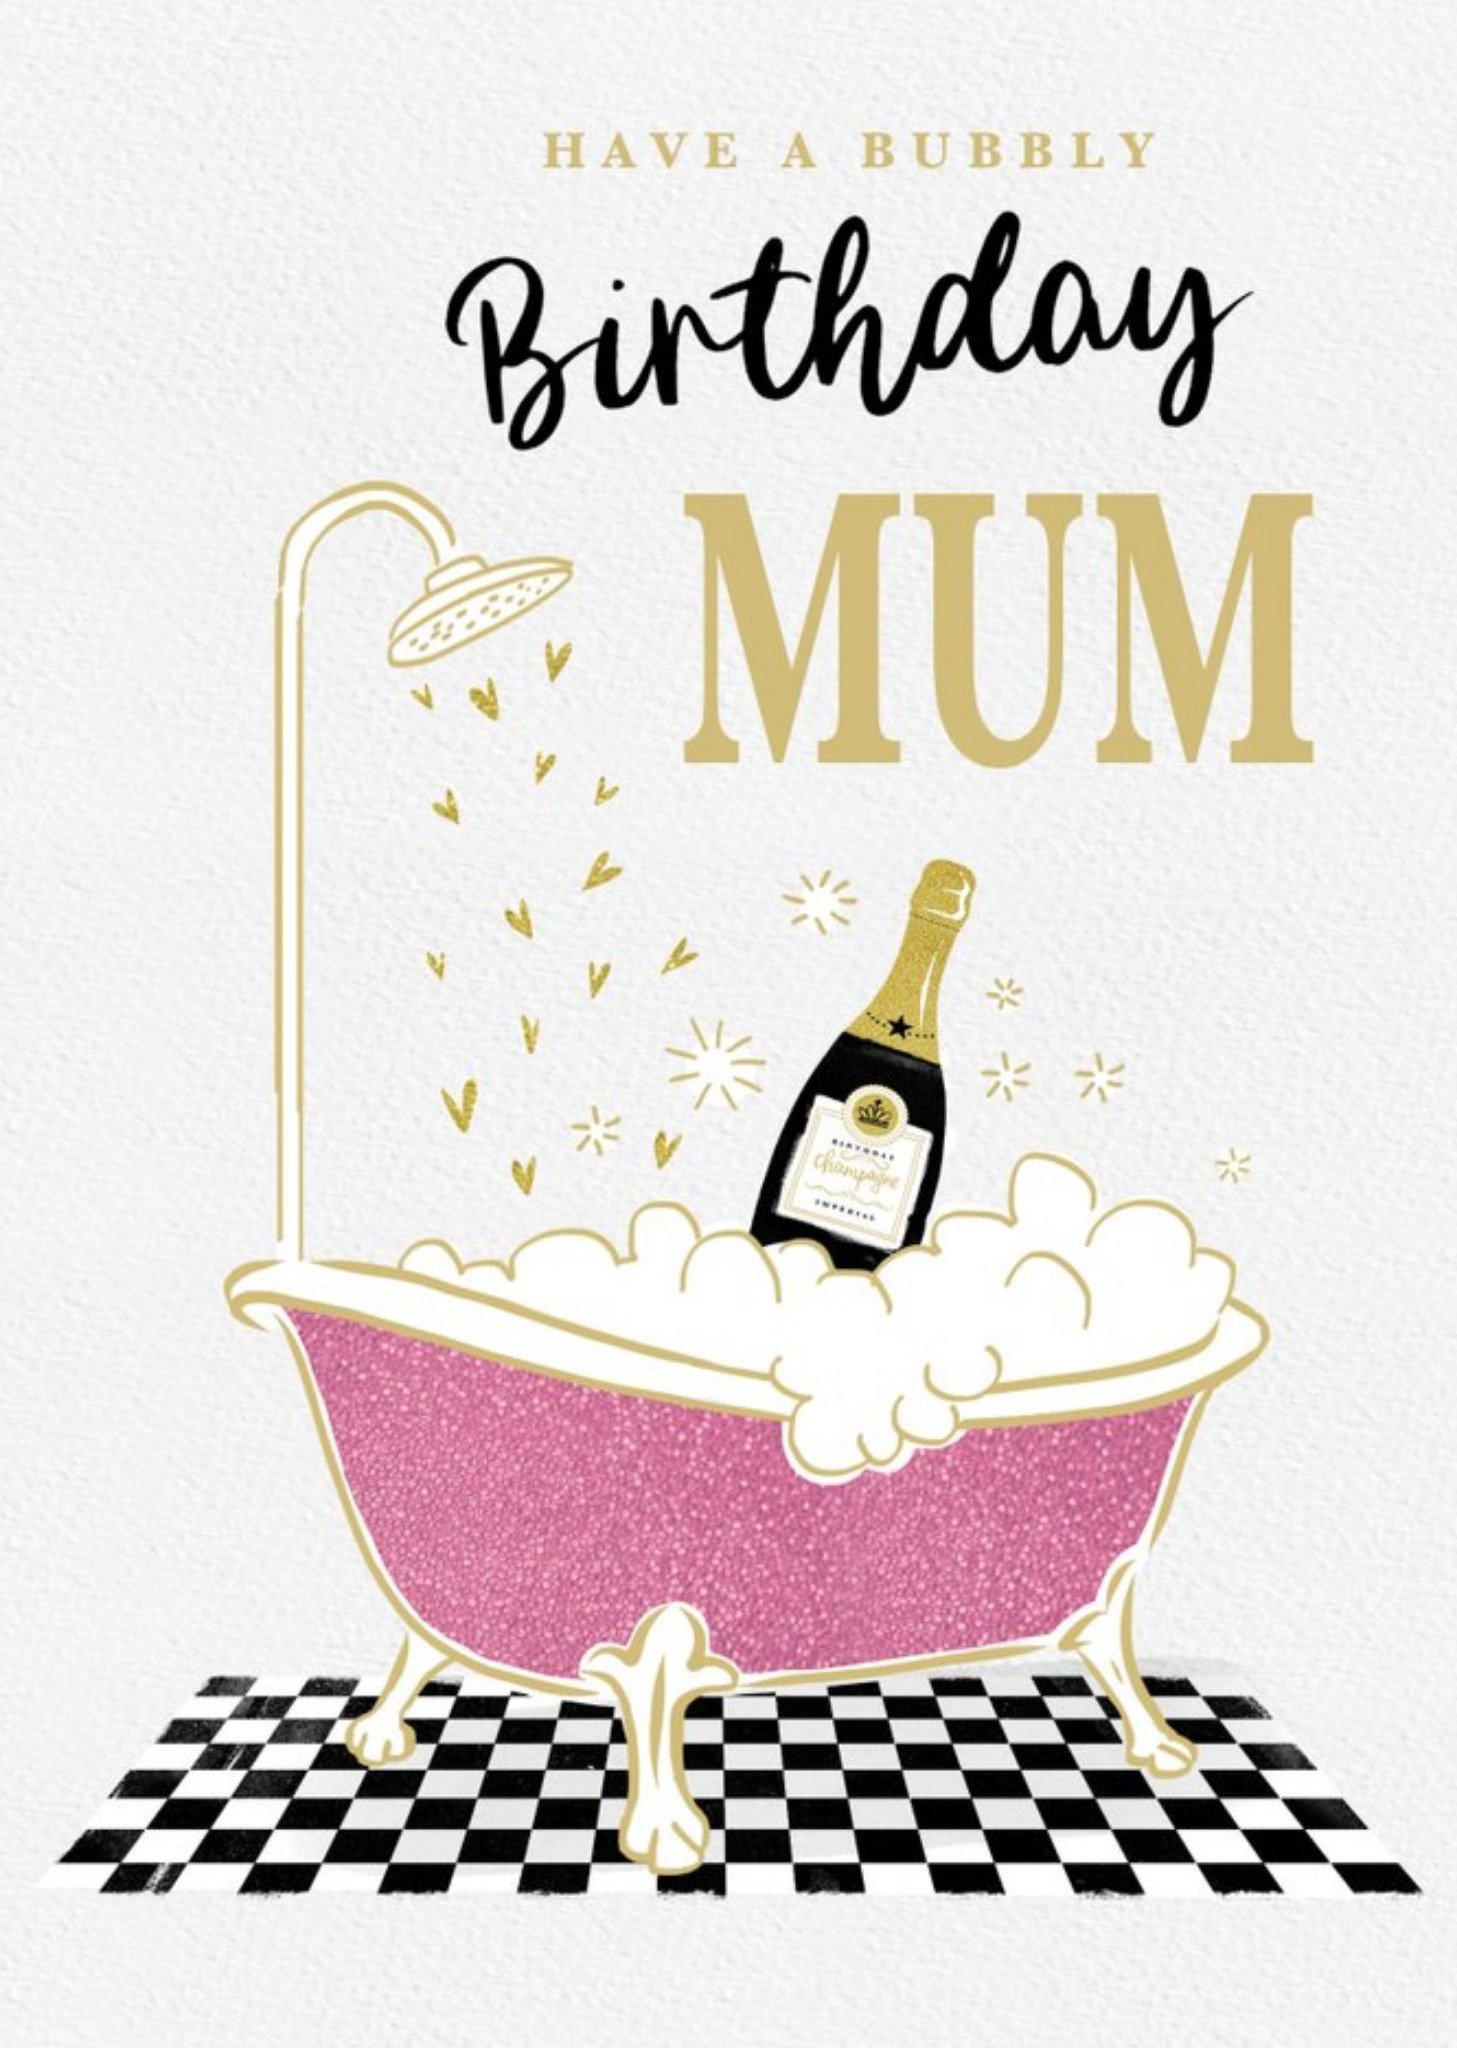 Moonpig Illustration Of A Bubble Bath With A Bottle Of Bubbly Mum's Birthday Card Ecard